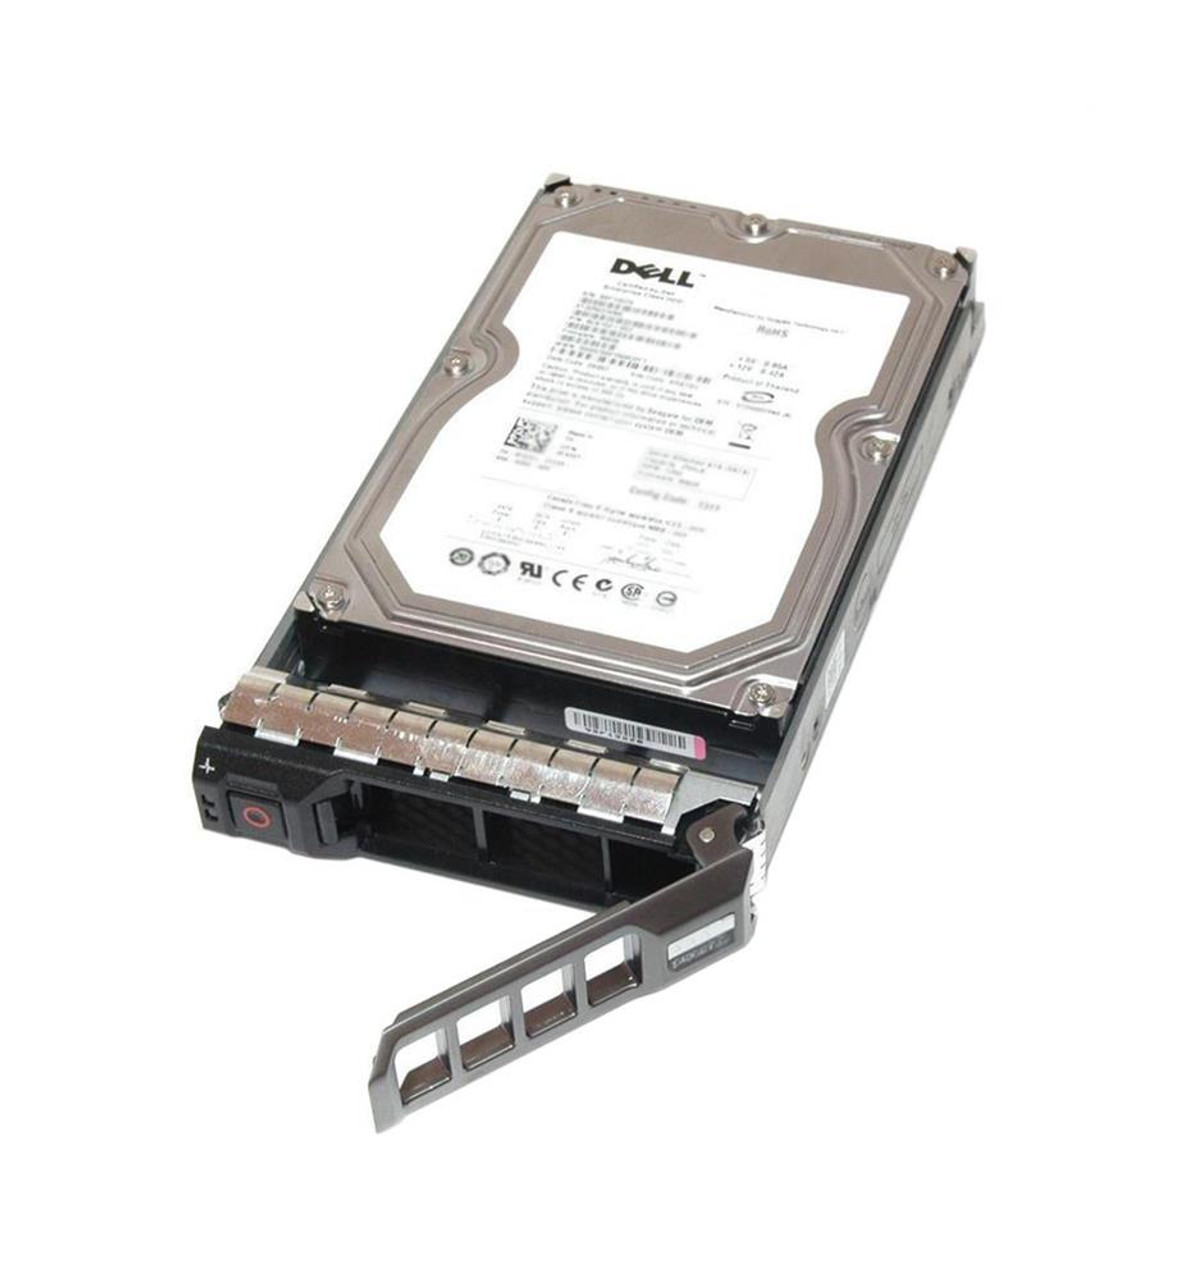 44GM5 Dell 4TB 7200RPM SAS 12Gbps Dual Port (512n) 3.5-inch Internal Hard Drive with Tray